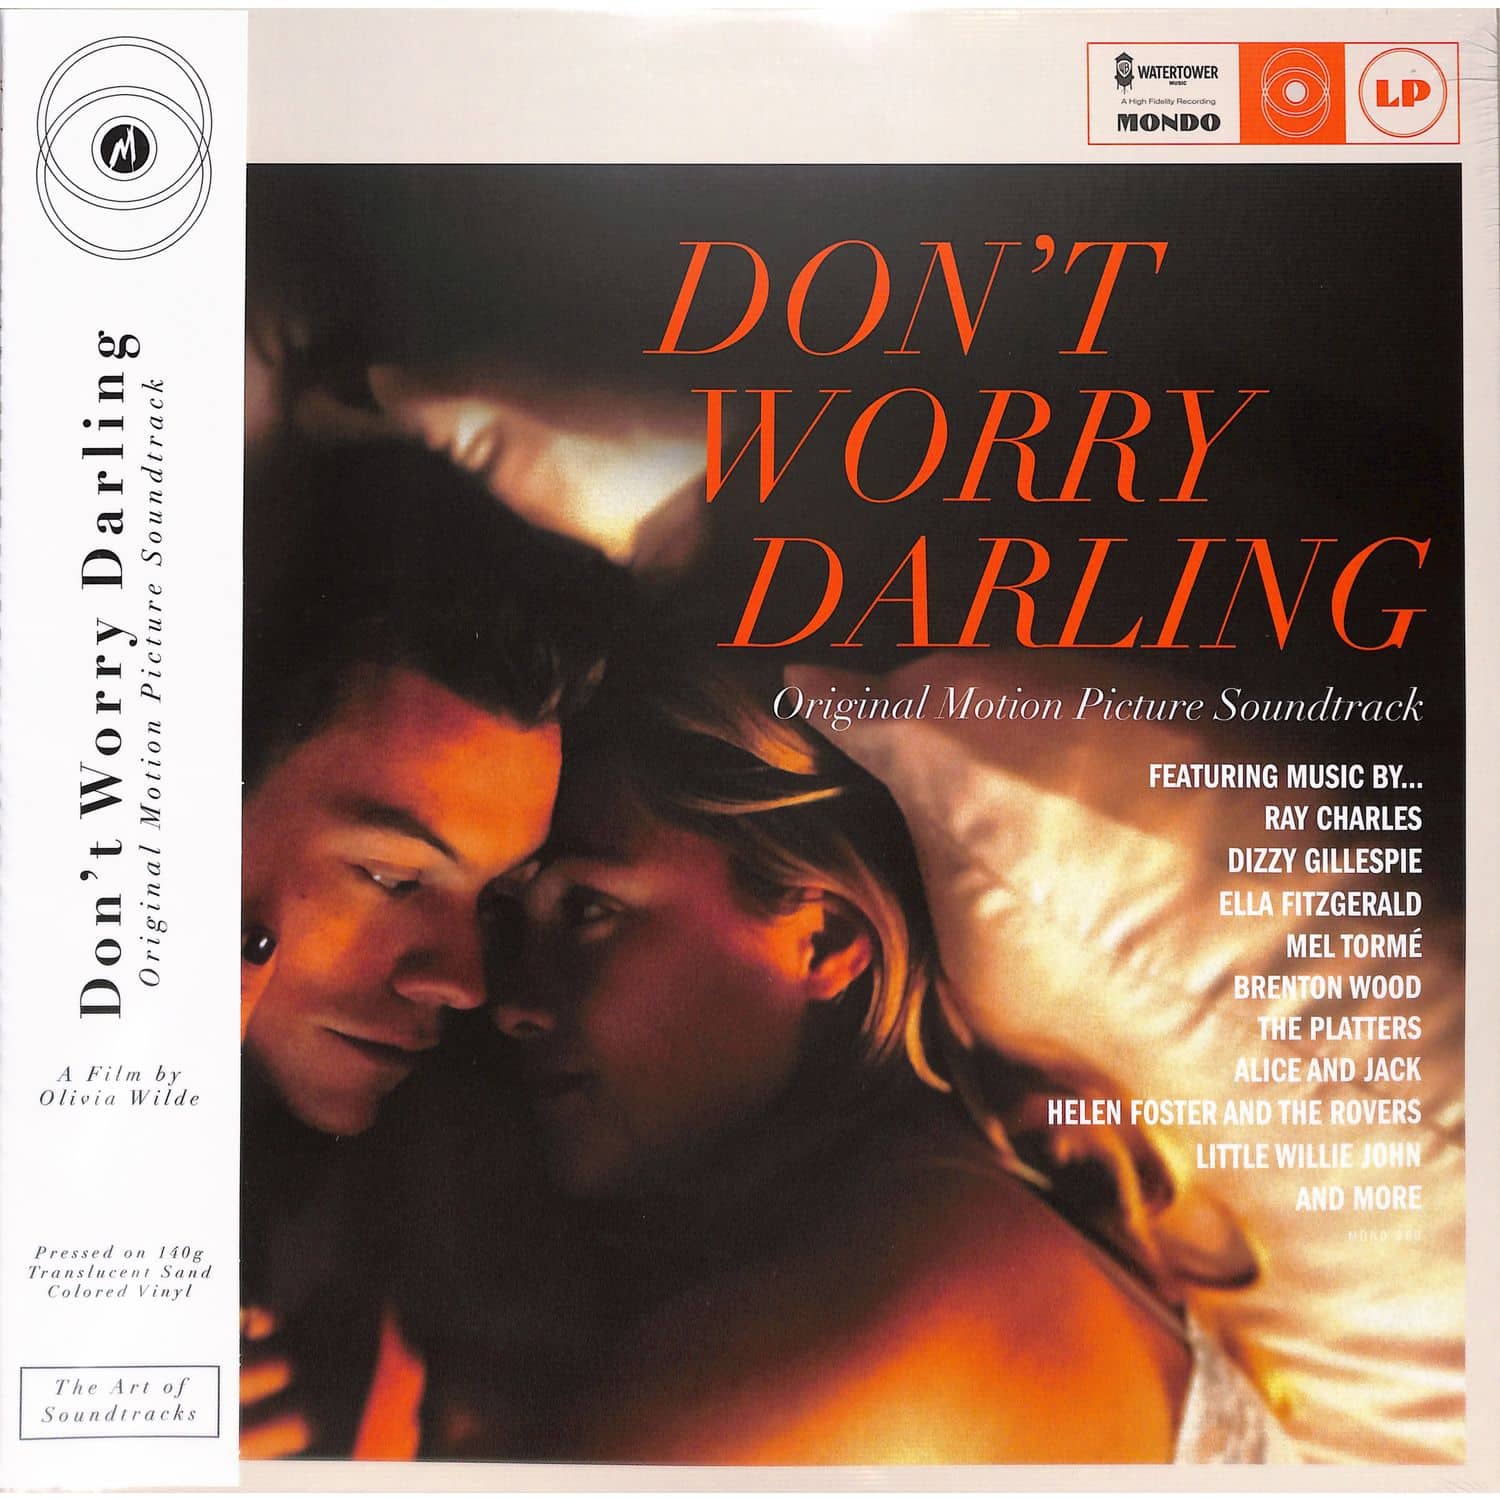 OST / John Powell - DON T WORRY DARLING 